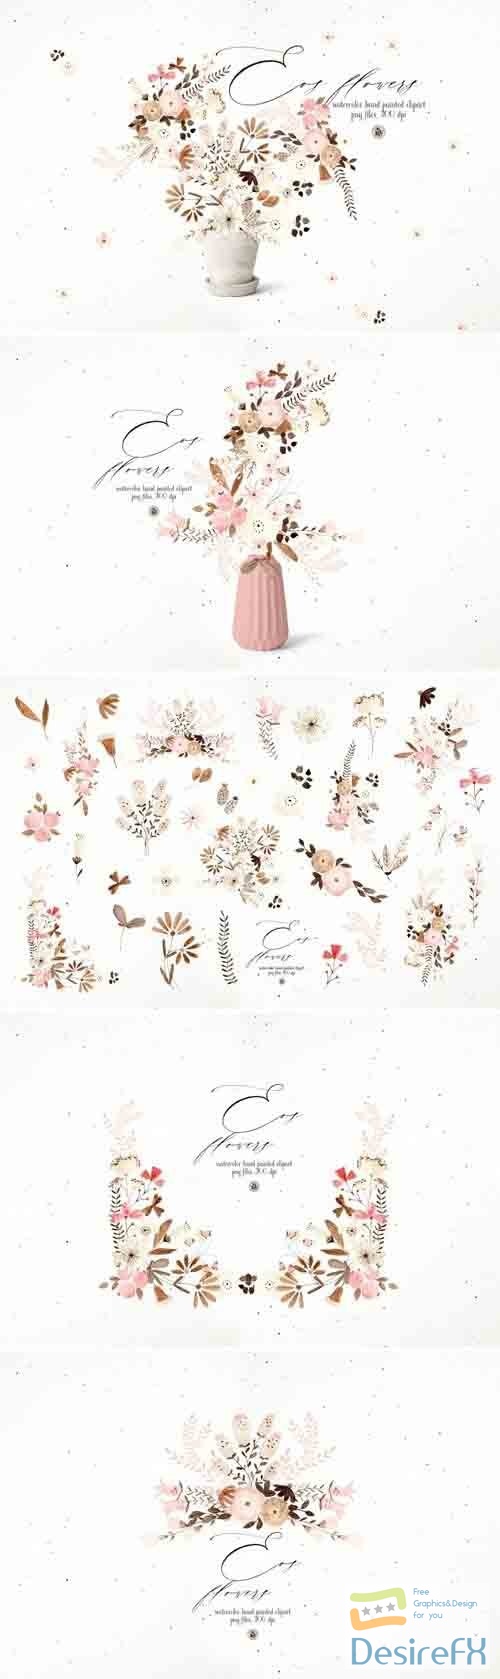 Eos Flowers - watercolor clipart - 6093852